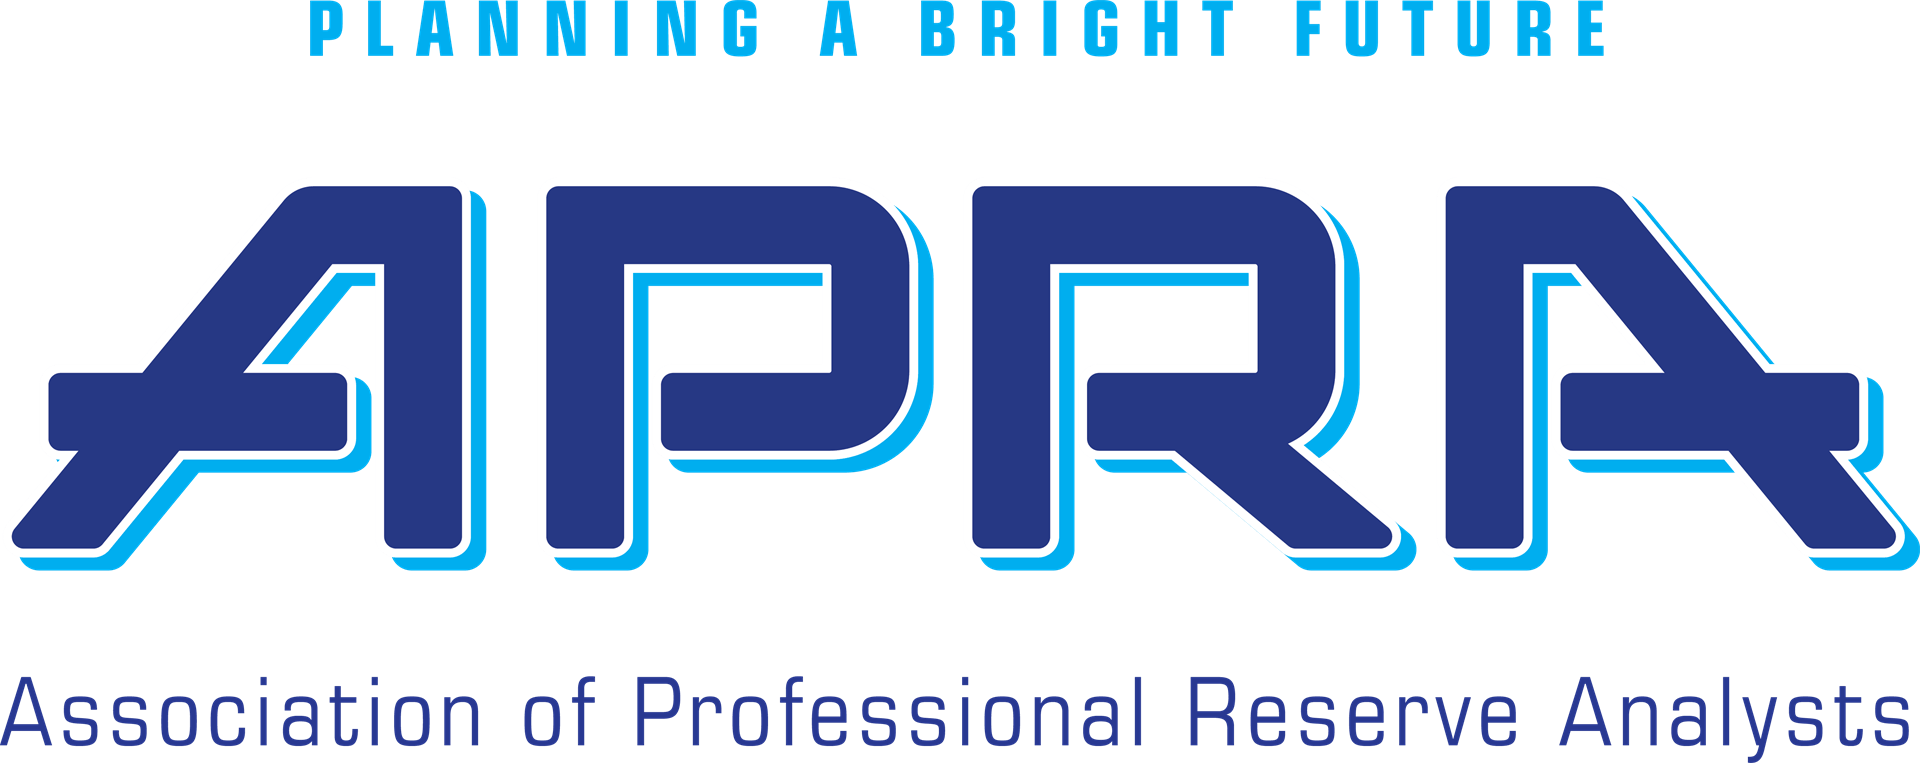 The logo of the Association of Professional Reserve Analysts